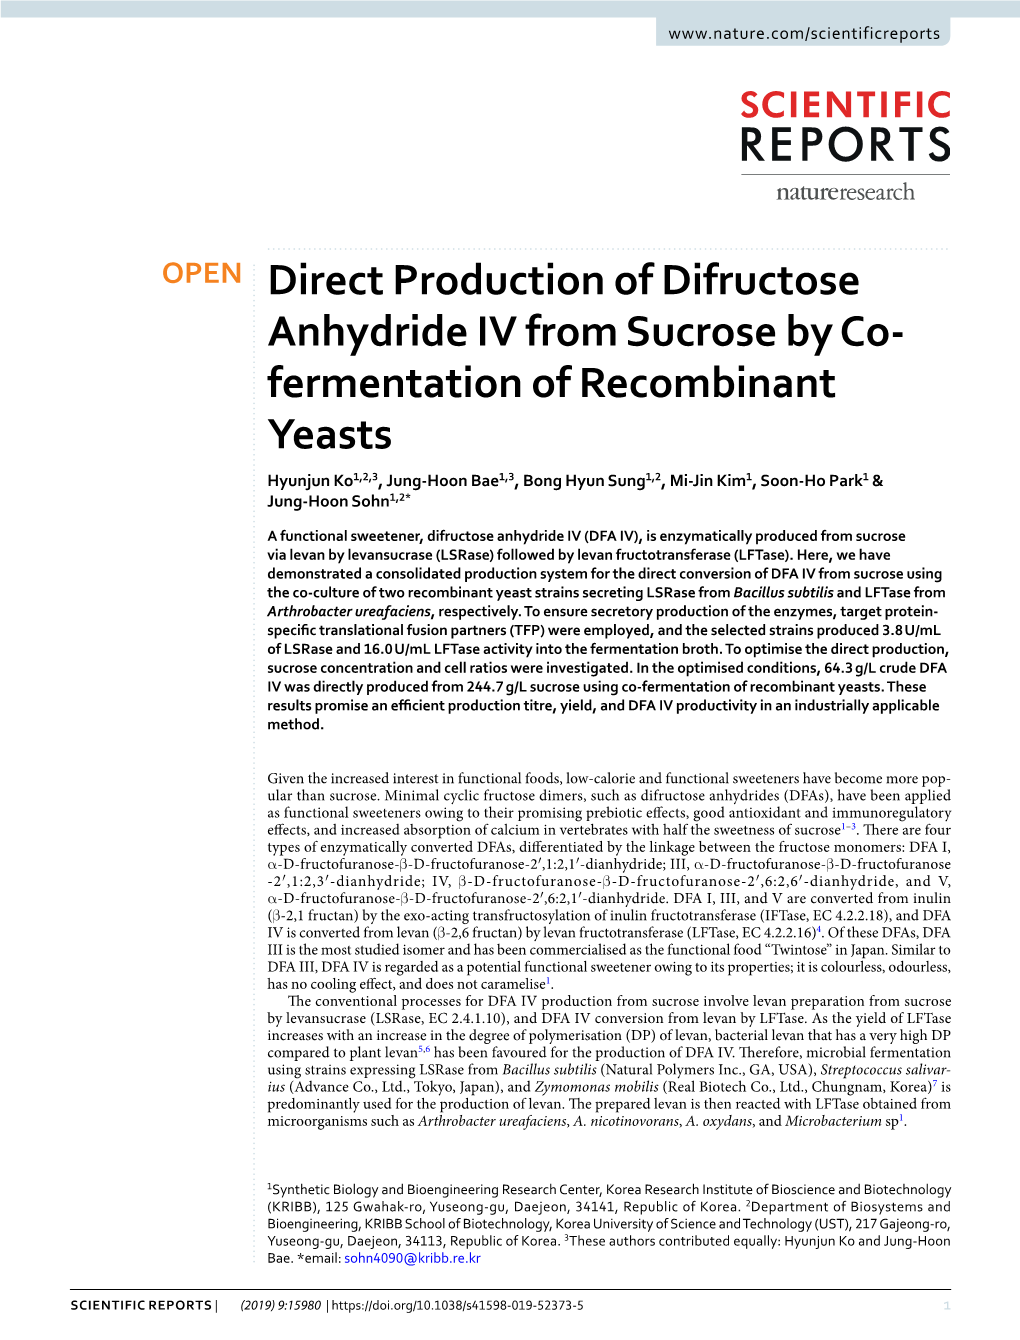 Direct Production of Difructose Anhydride IV from Sucrose by Co